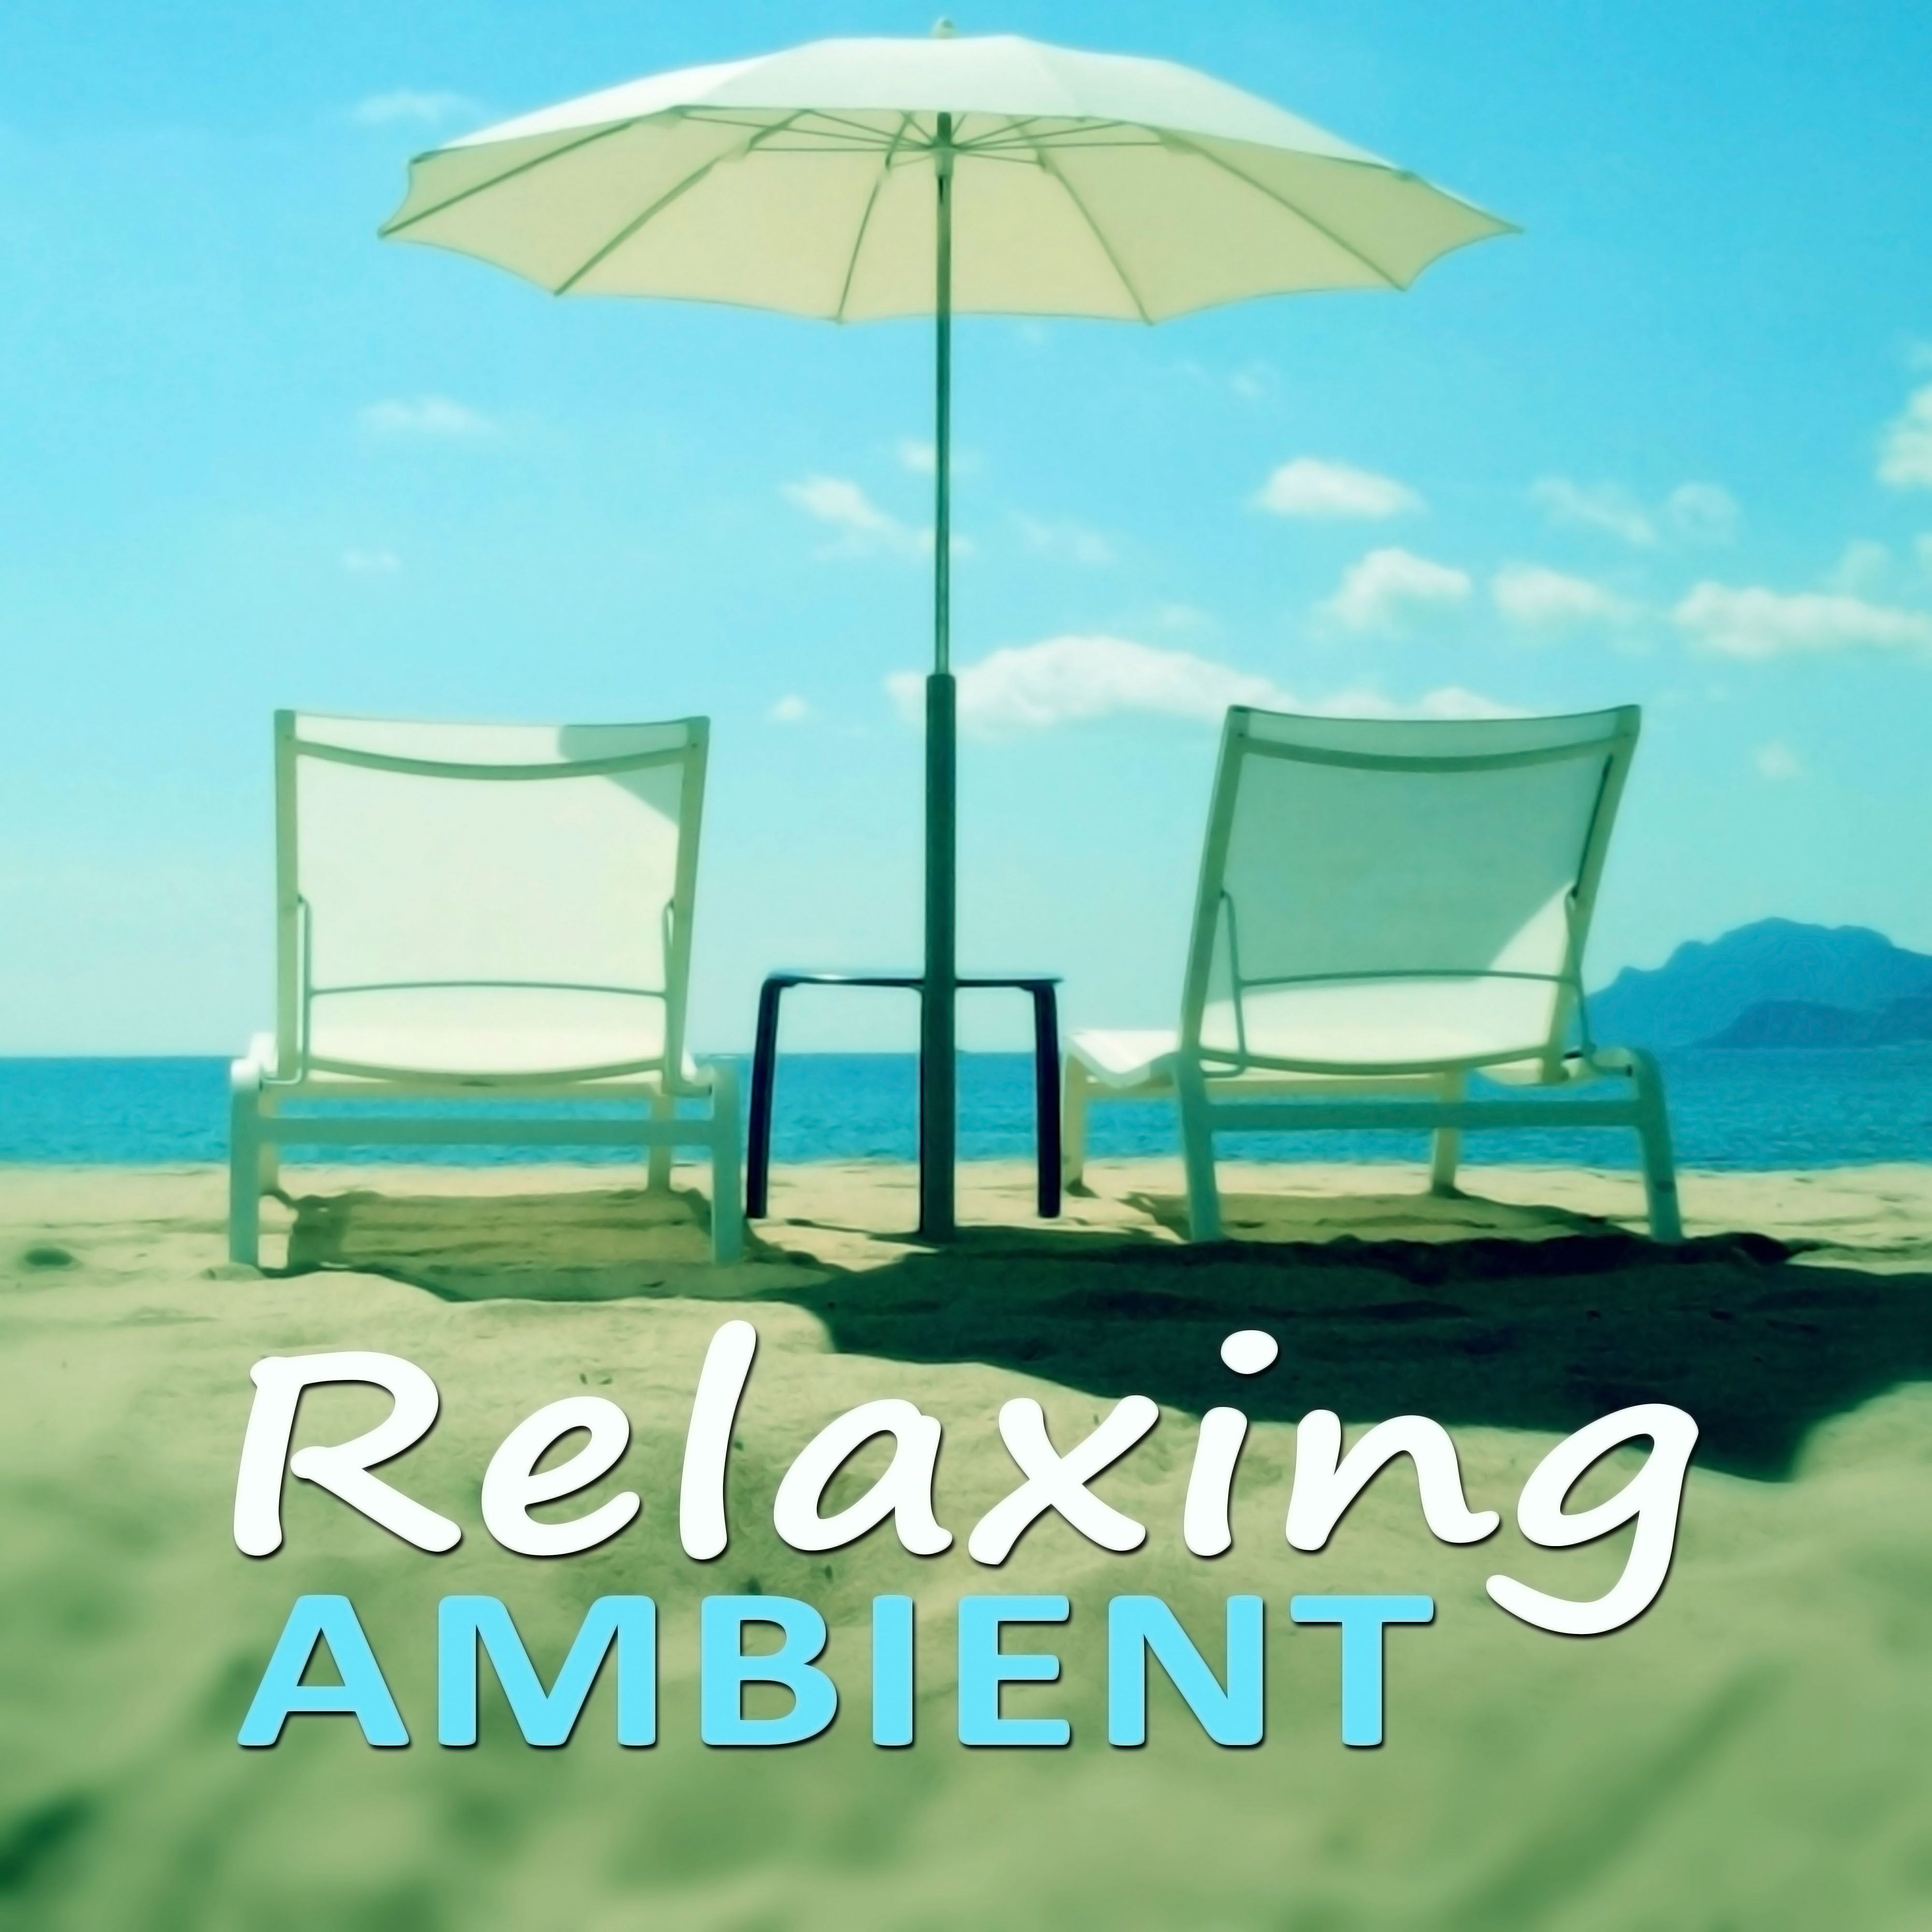 Relaxing Ambient – Healing Relaxation, Spa Music, Massage, Mindfulness Meditation Therapy, Calm Waves